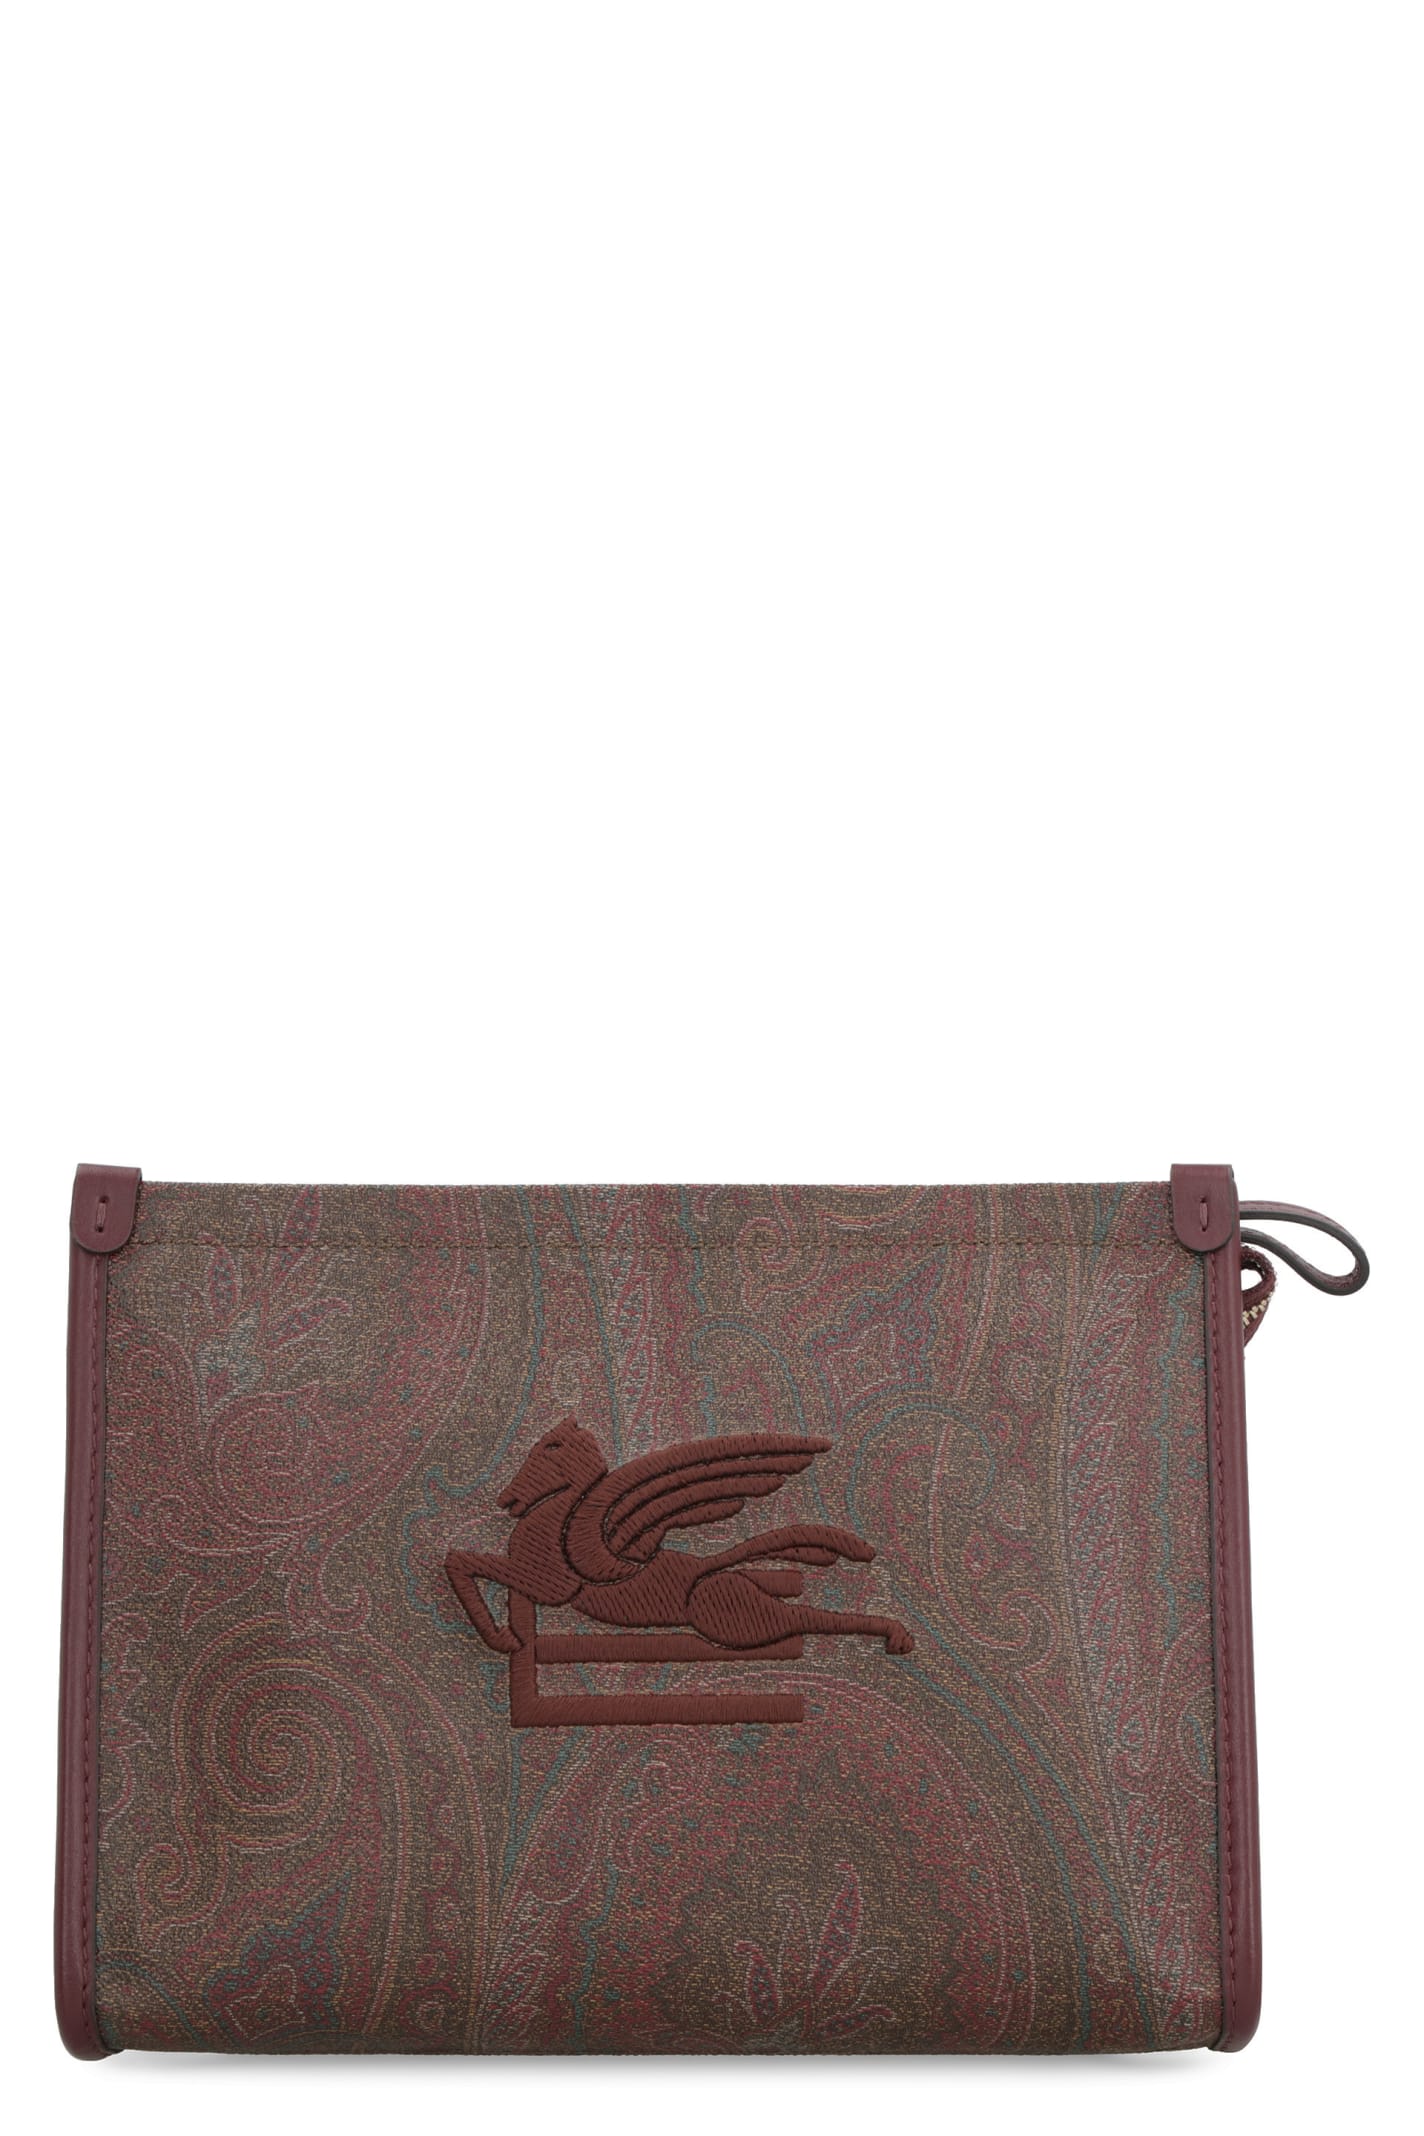 Etro Love Trotter Pouch